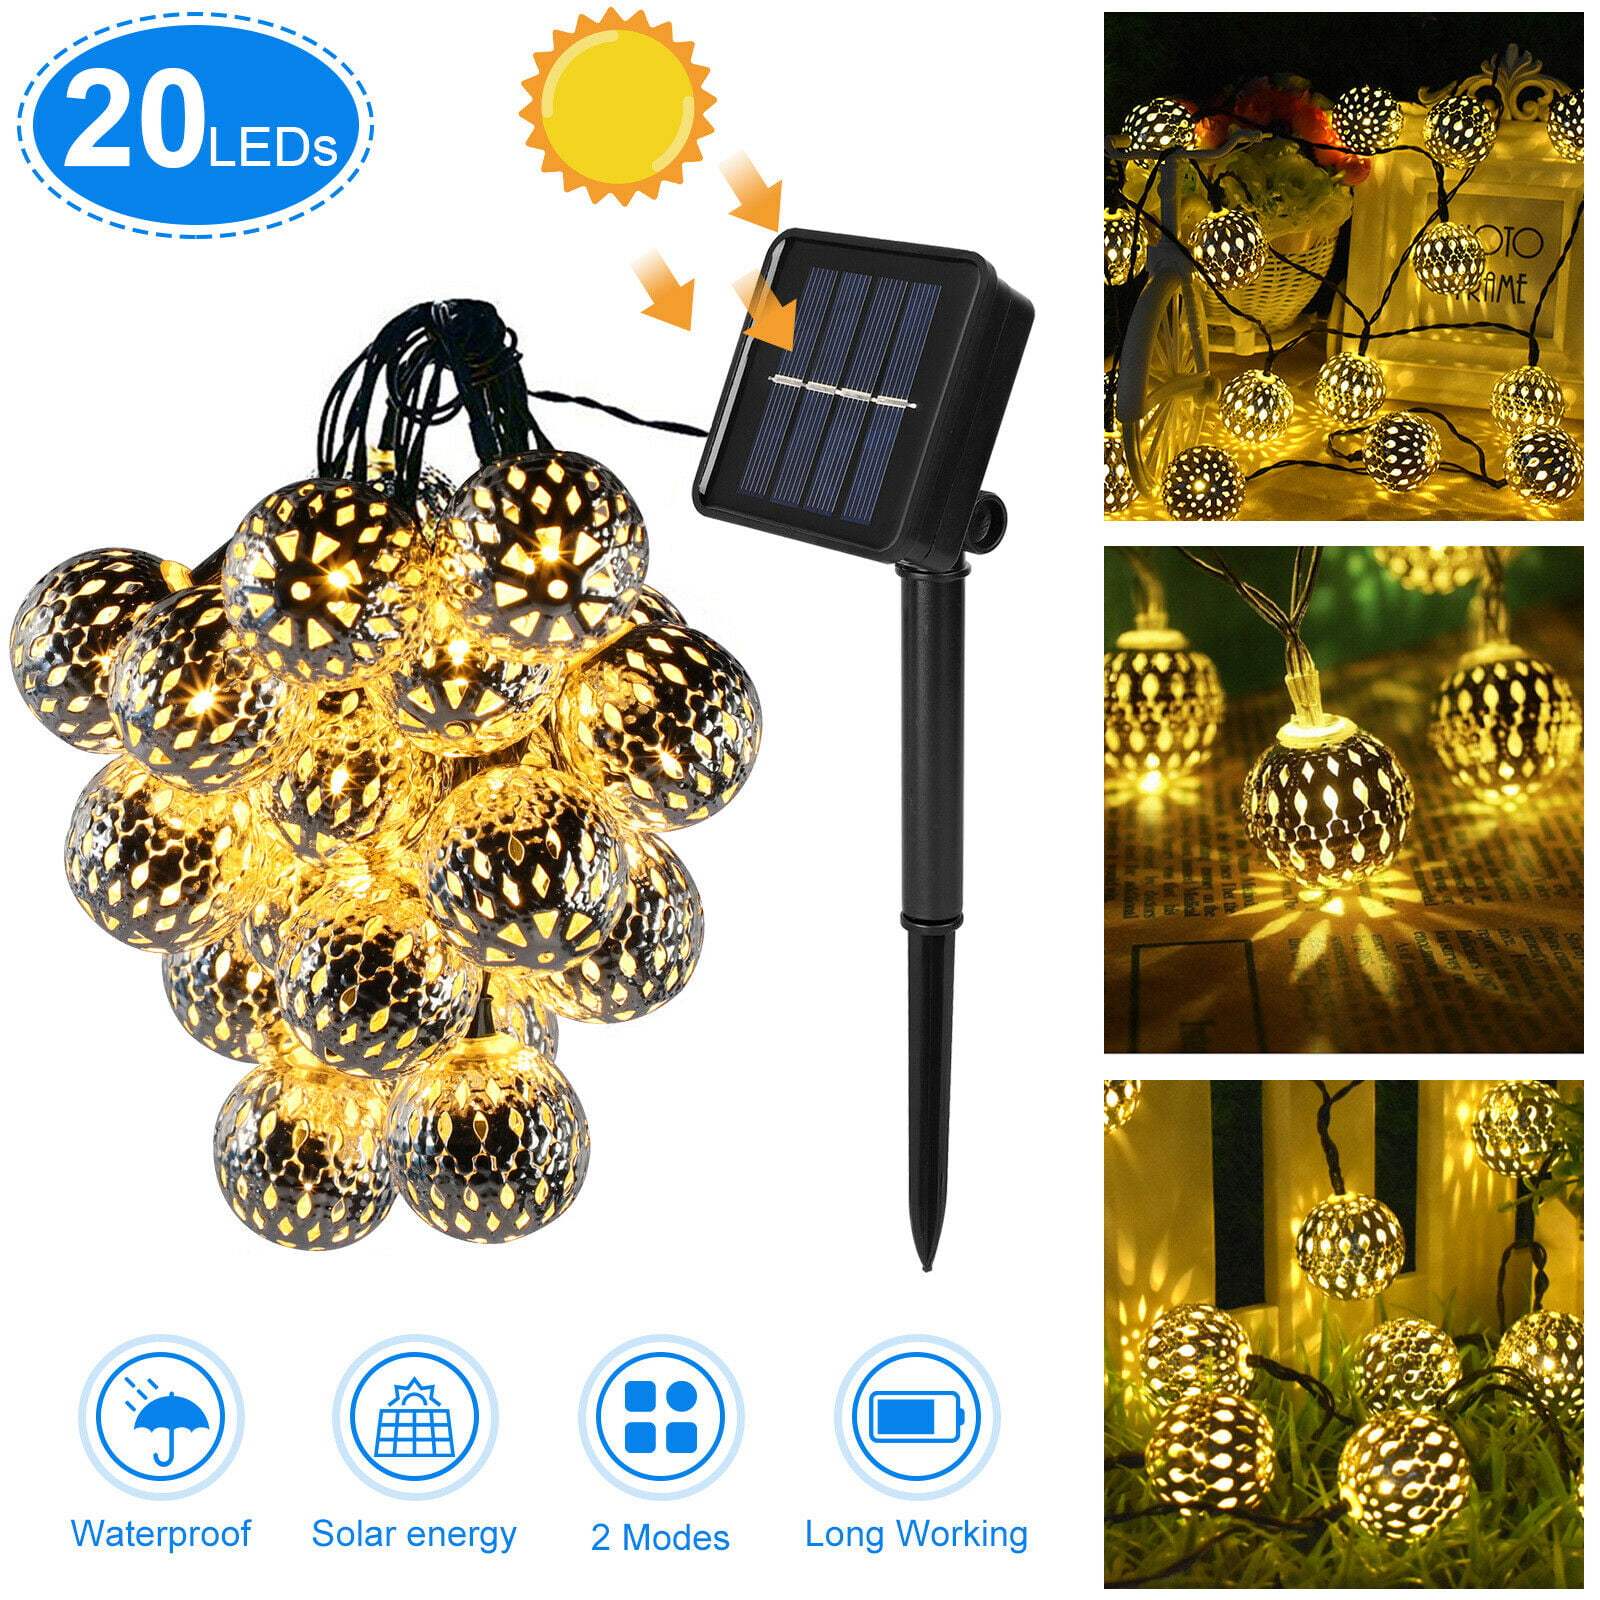 Details about   20LED Waterproof Solar Outdoor Moroccan String Light Party Path Yard Garden Lamp 